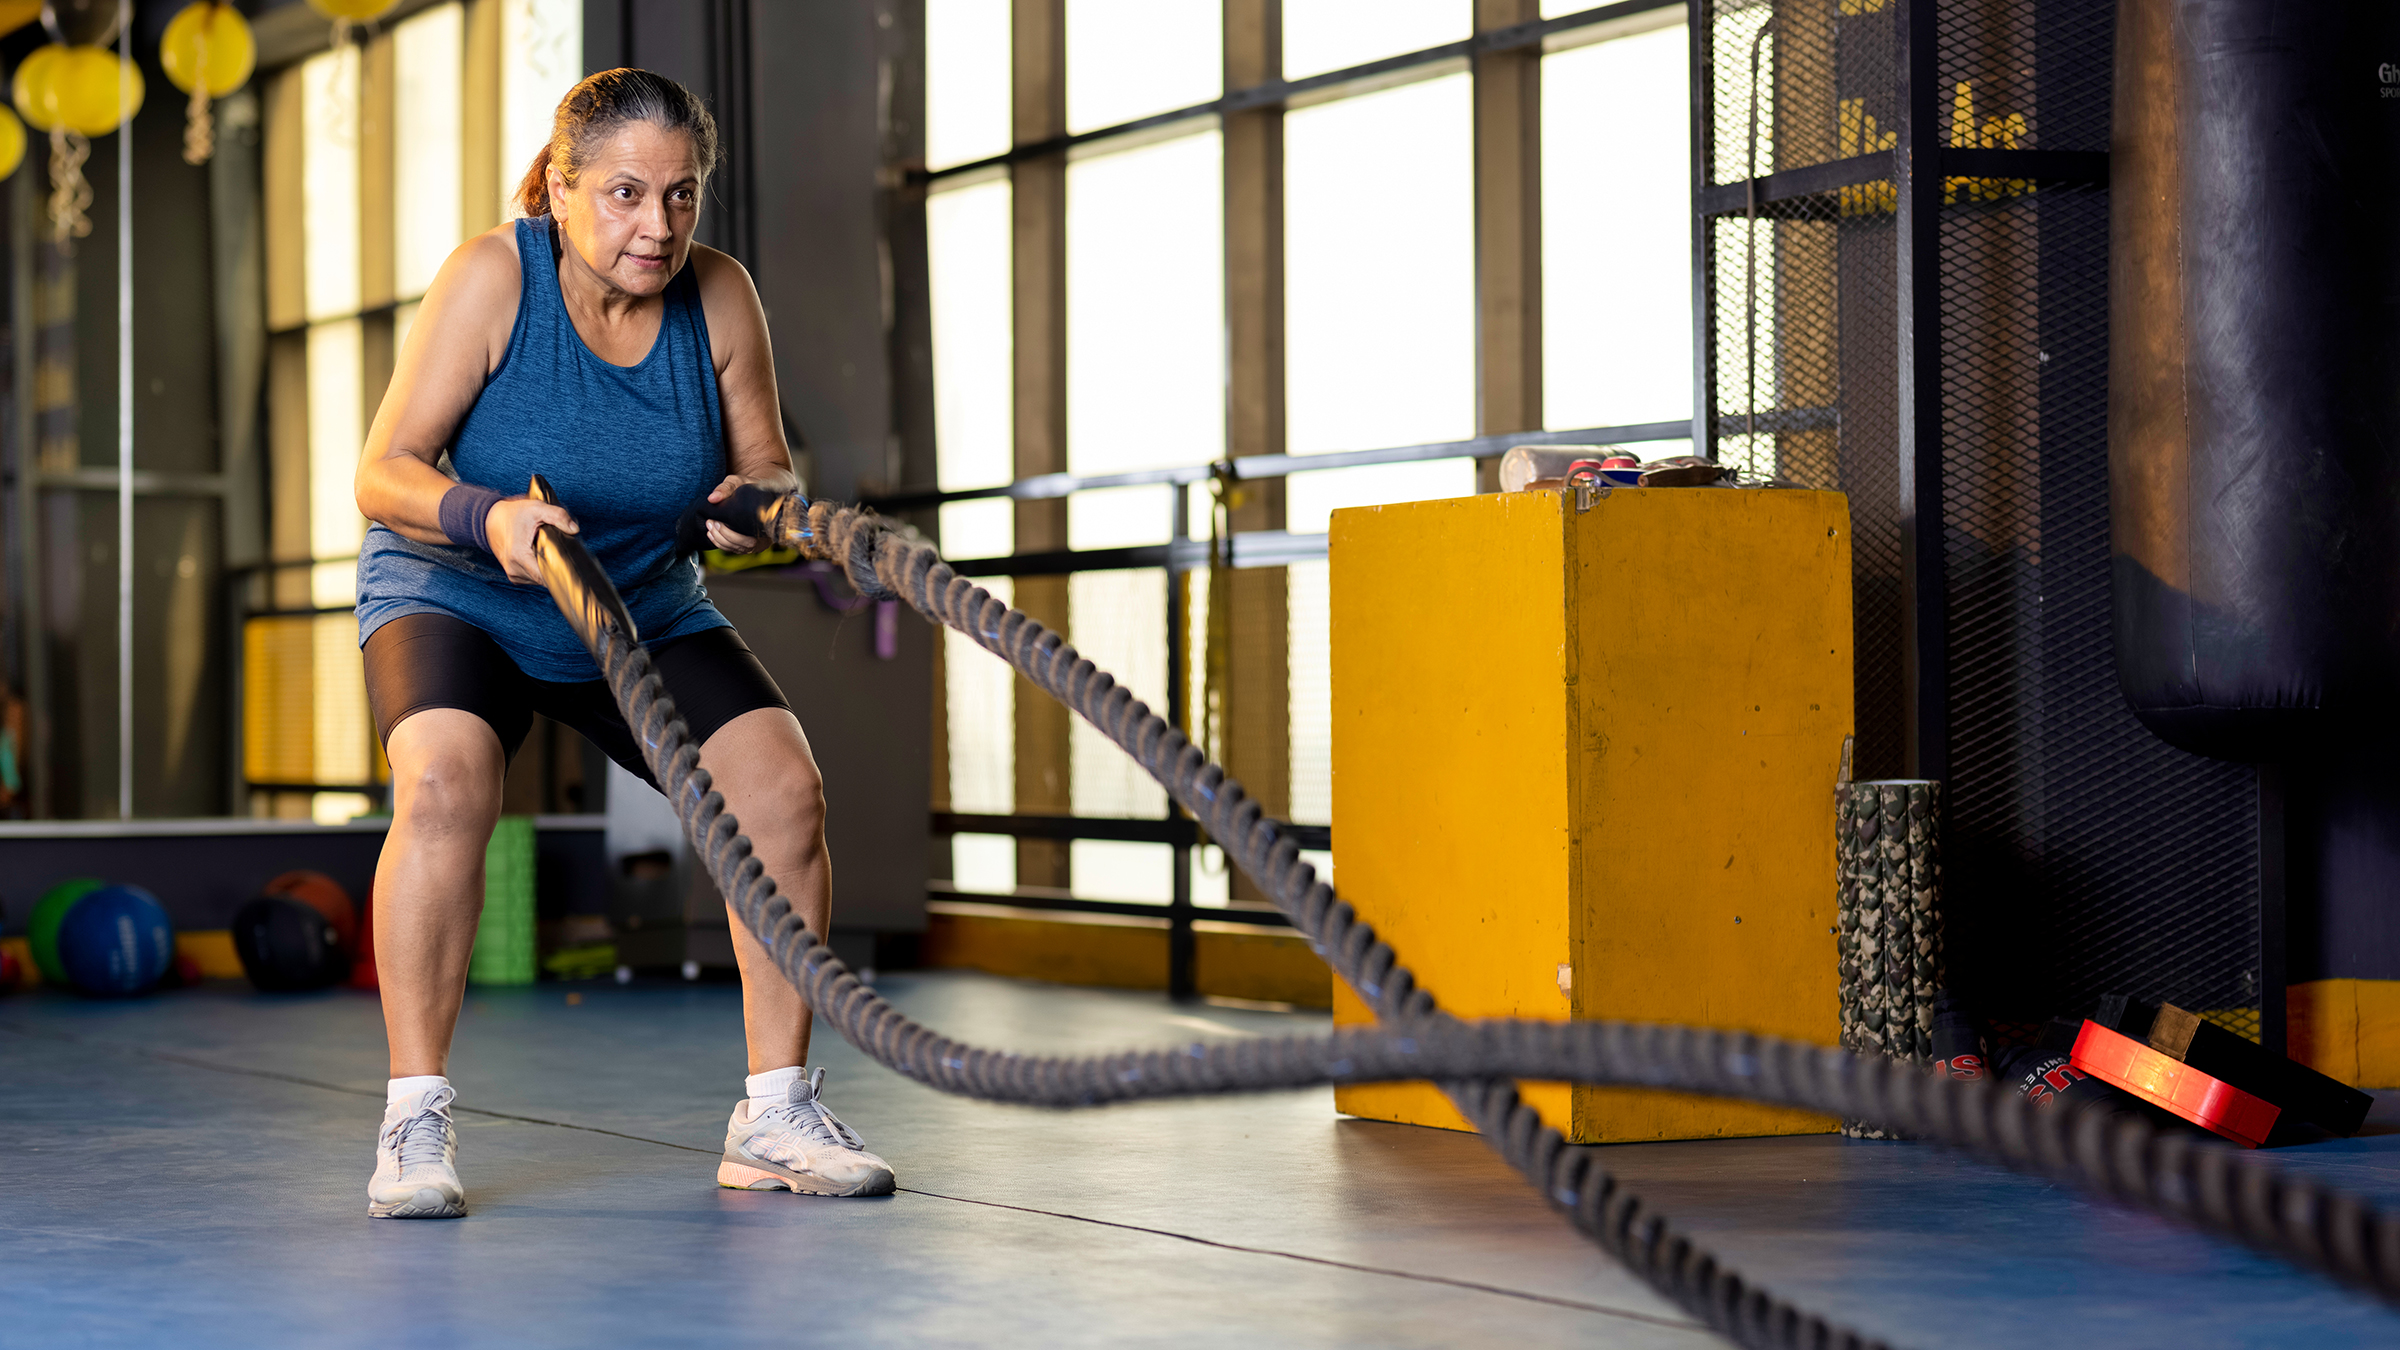 Battle Ropes - Should you use them? 